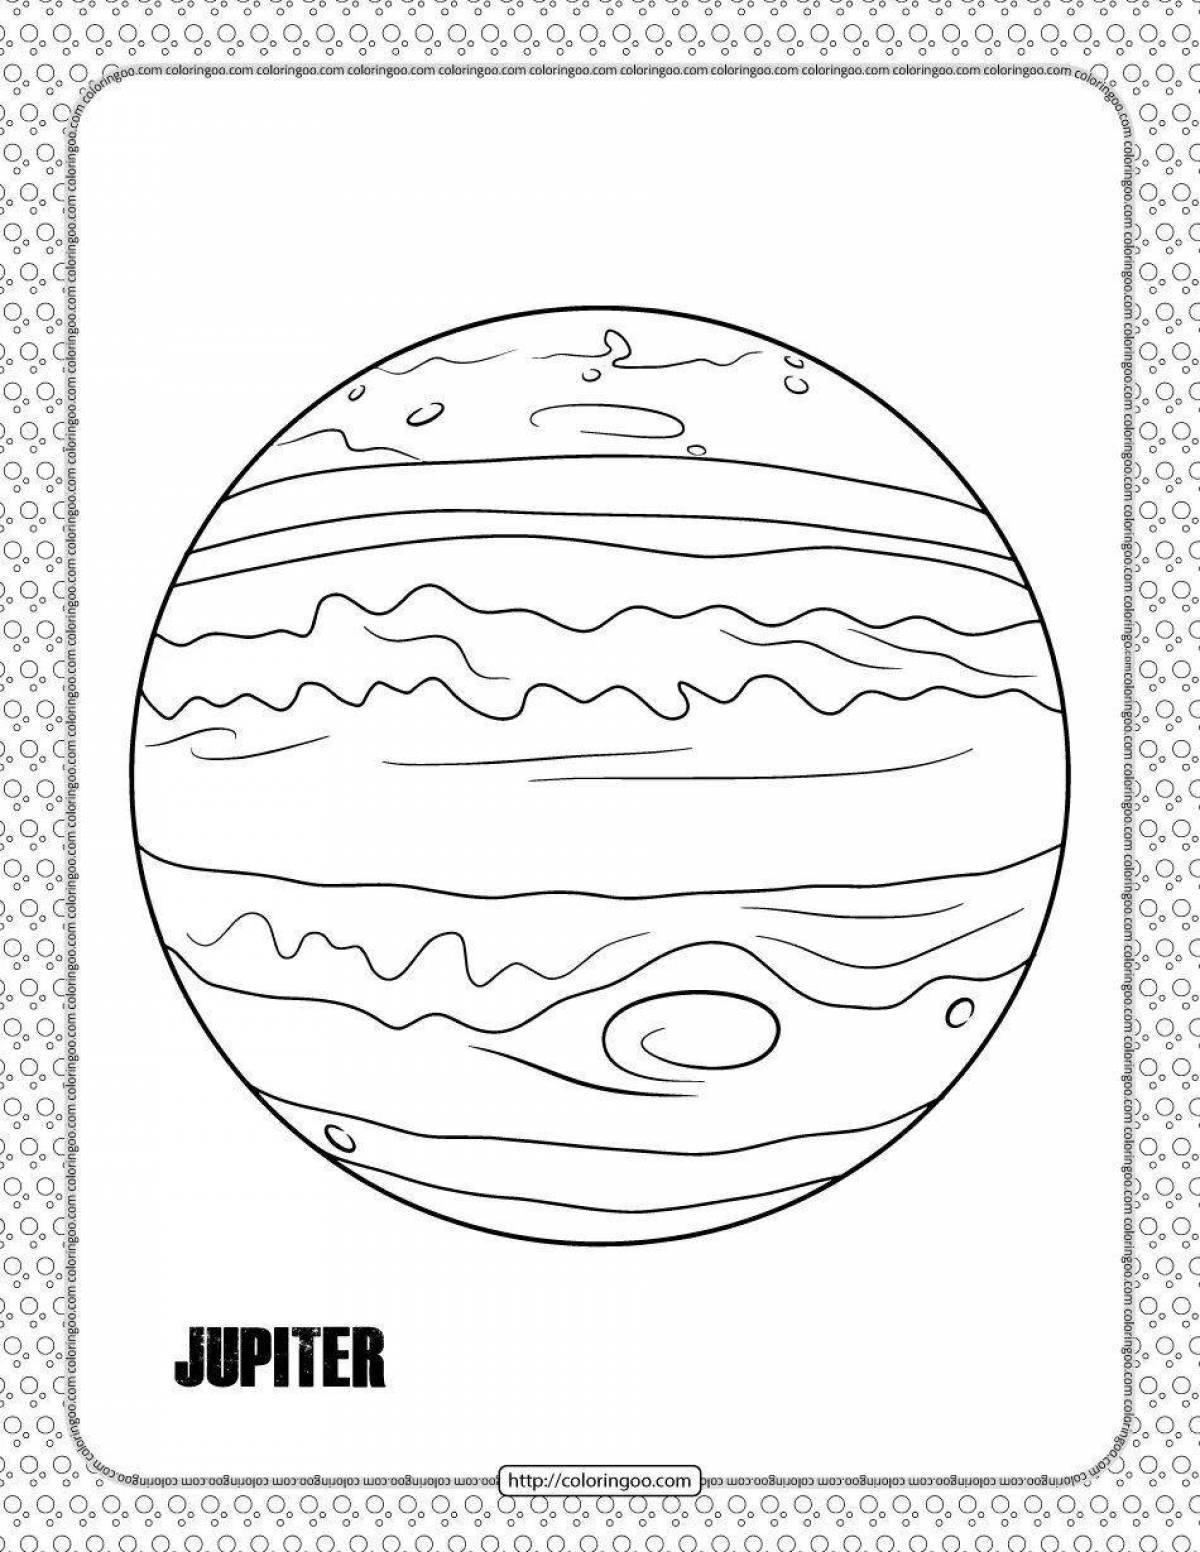 Coloring book shining planet Neptune